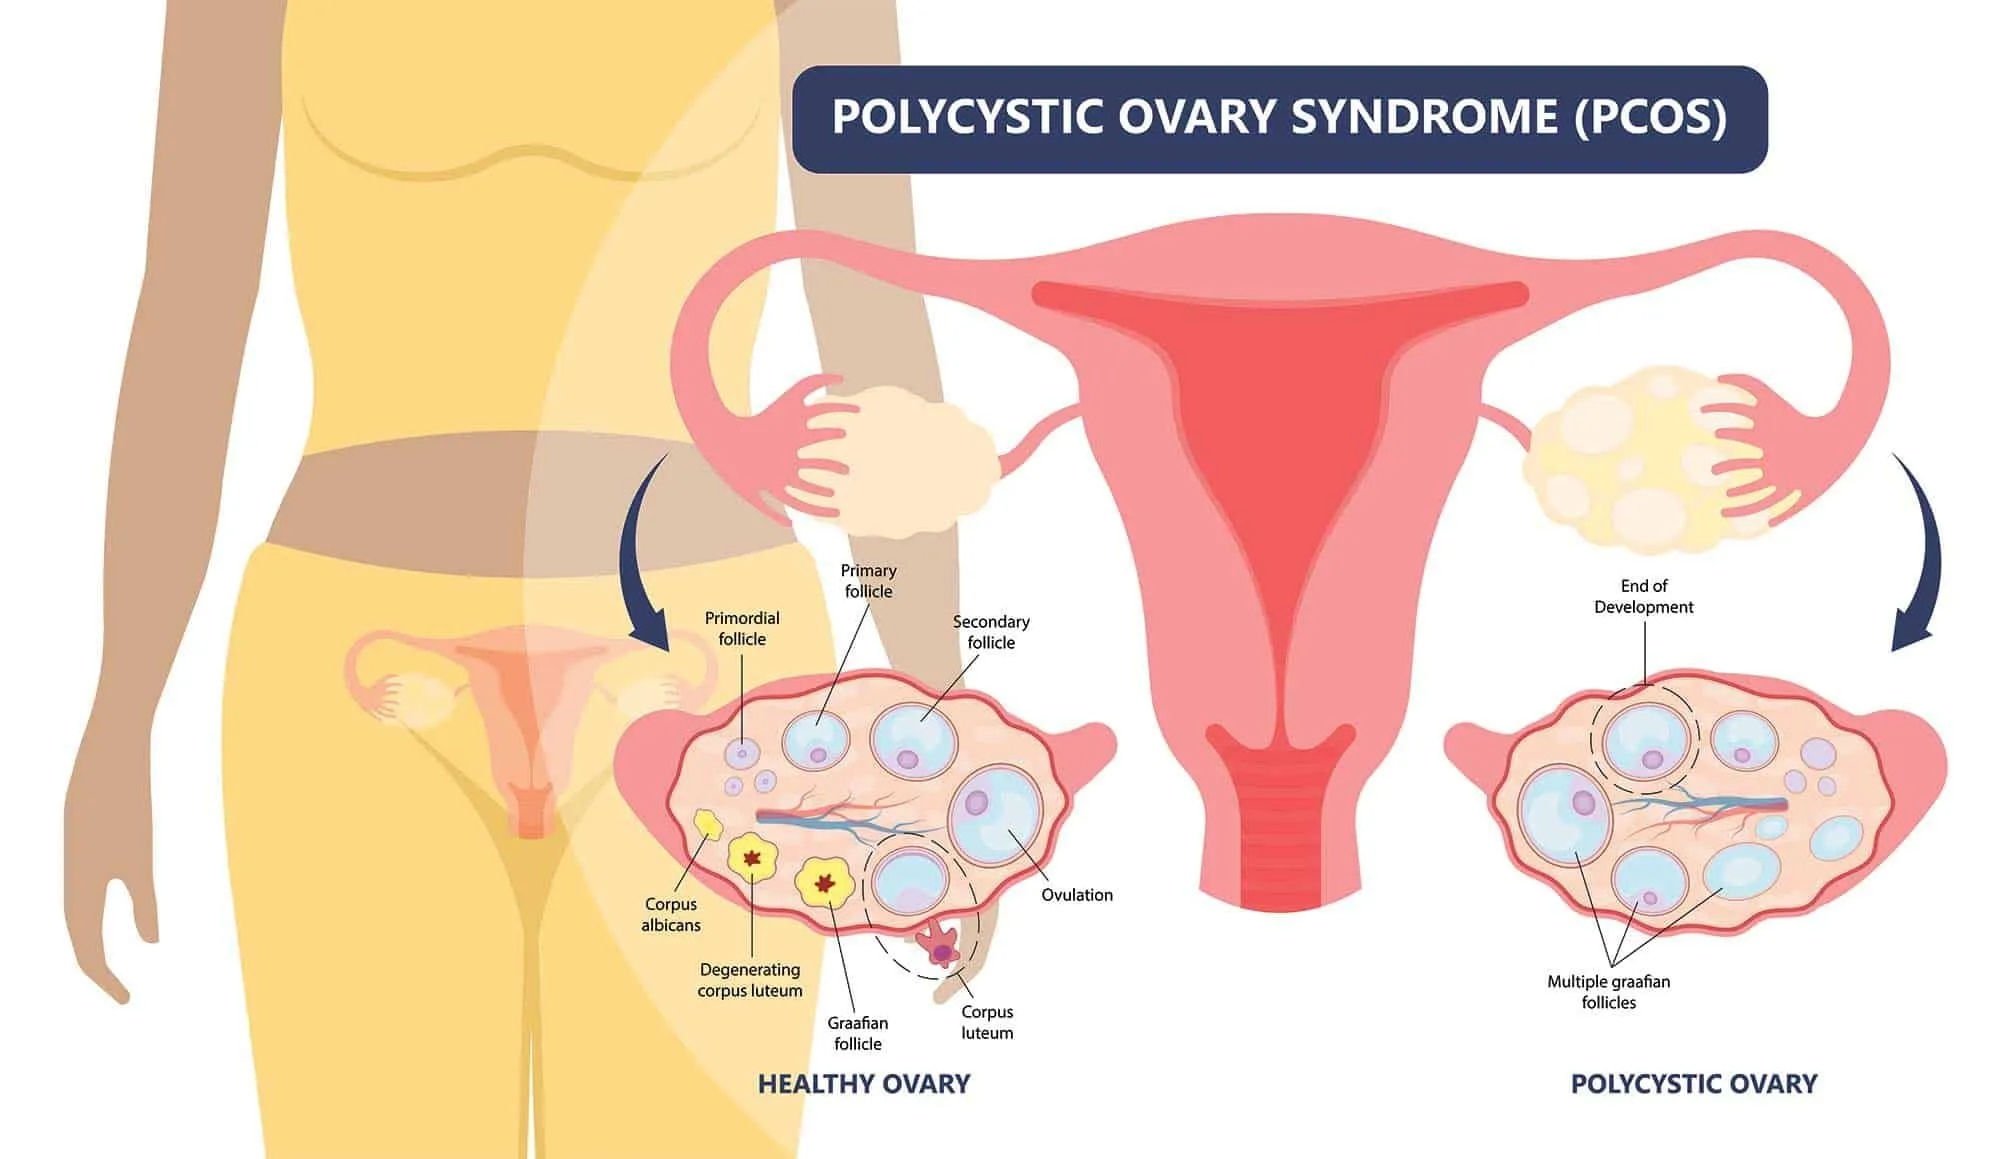 Can the effects of PCOS like Hirsutism be permanently cured?